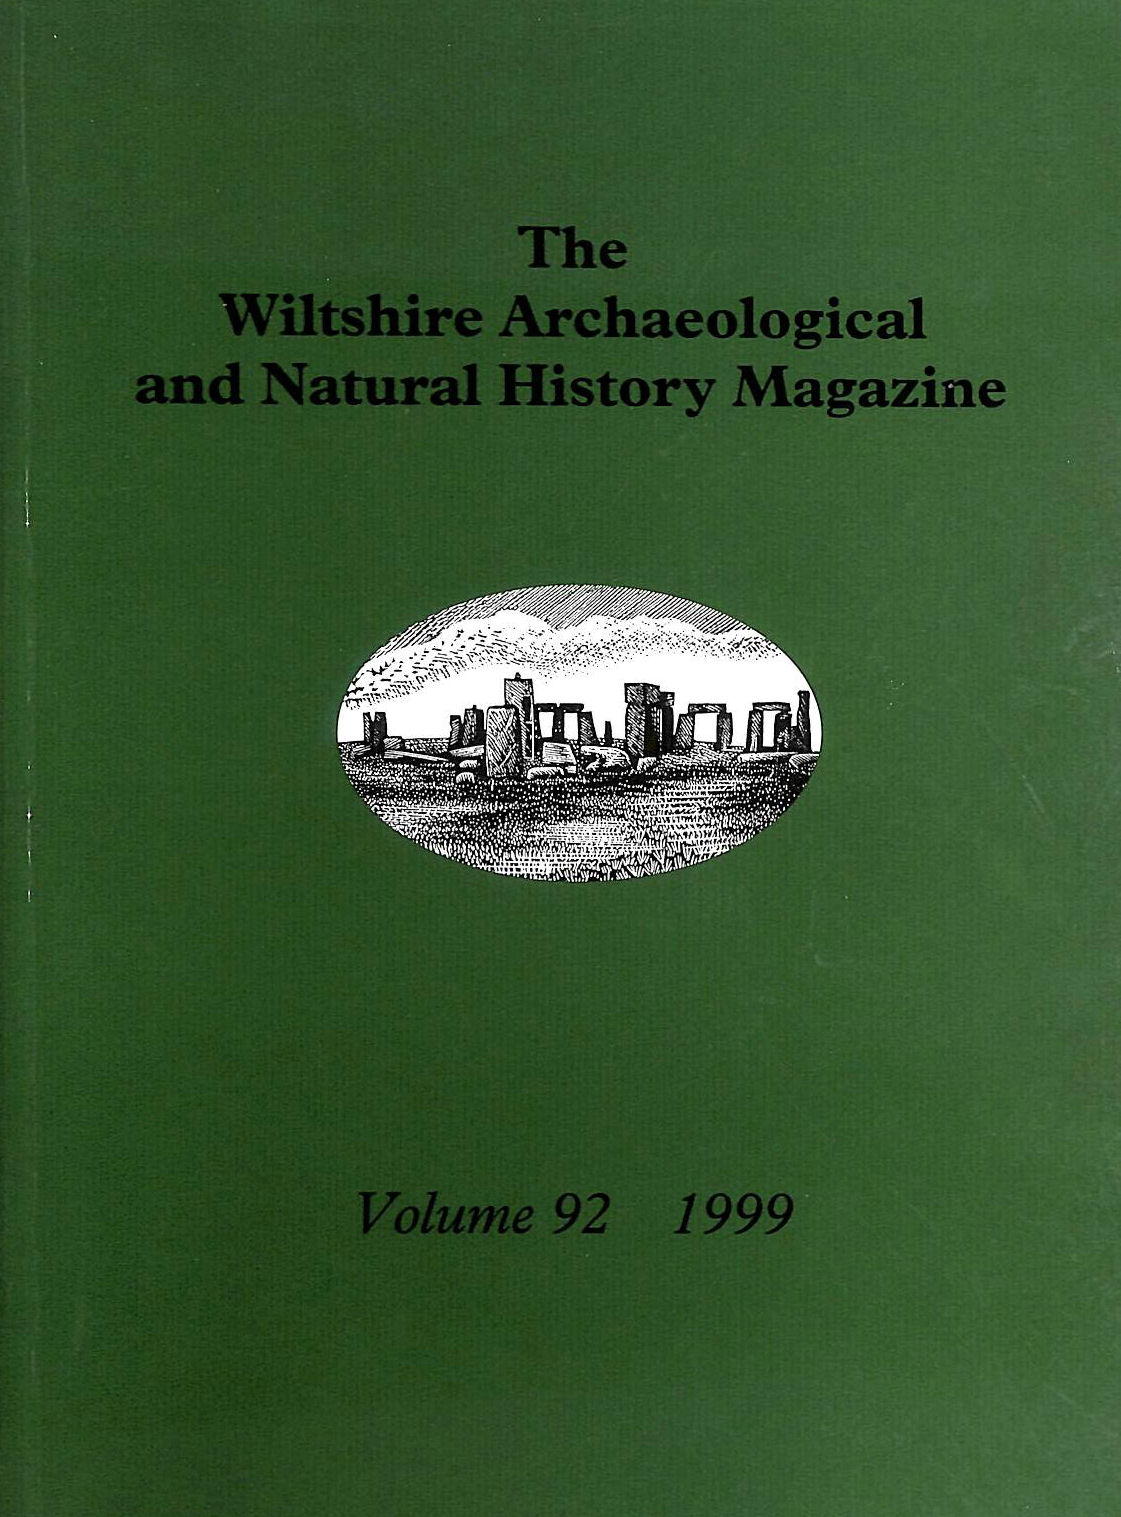 WILTSHIRE ARCHAEOLOGICAL AND NATURAL HISTORY SOCIETY - The Wiltshire Archaeological and Natural History Magazine Volume 92 1999